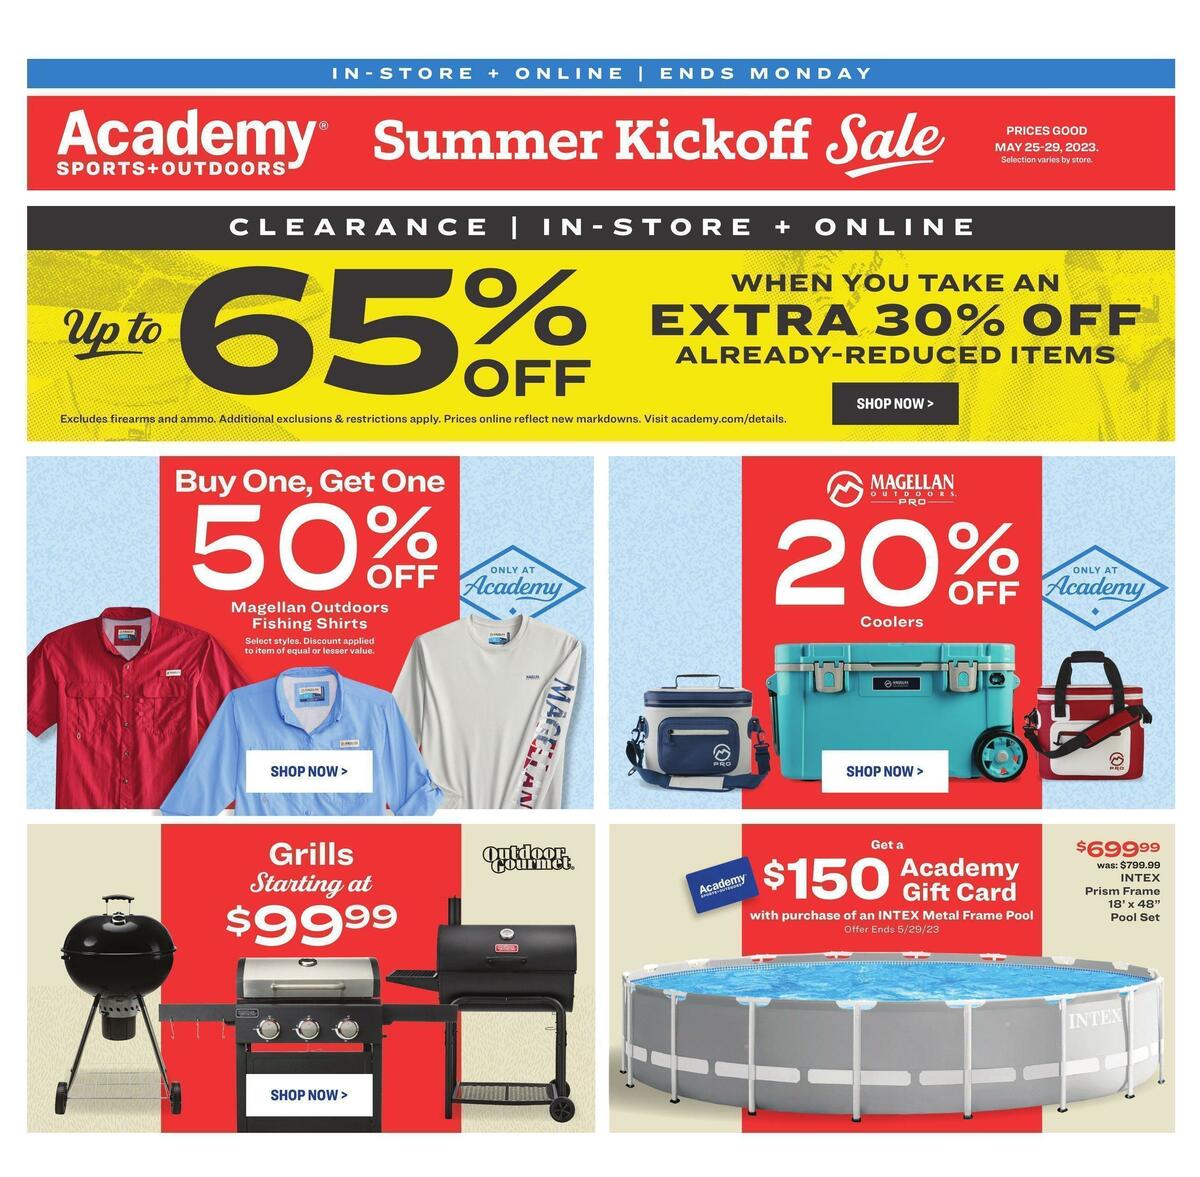 Academy Sports + Outdoors Summer Kickoff Sale Weekly Ad from May 25